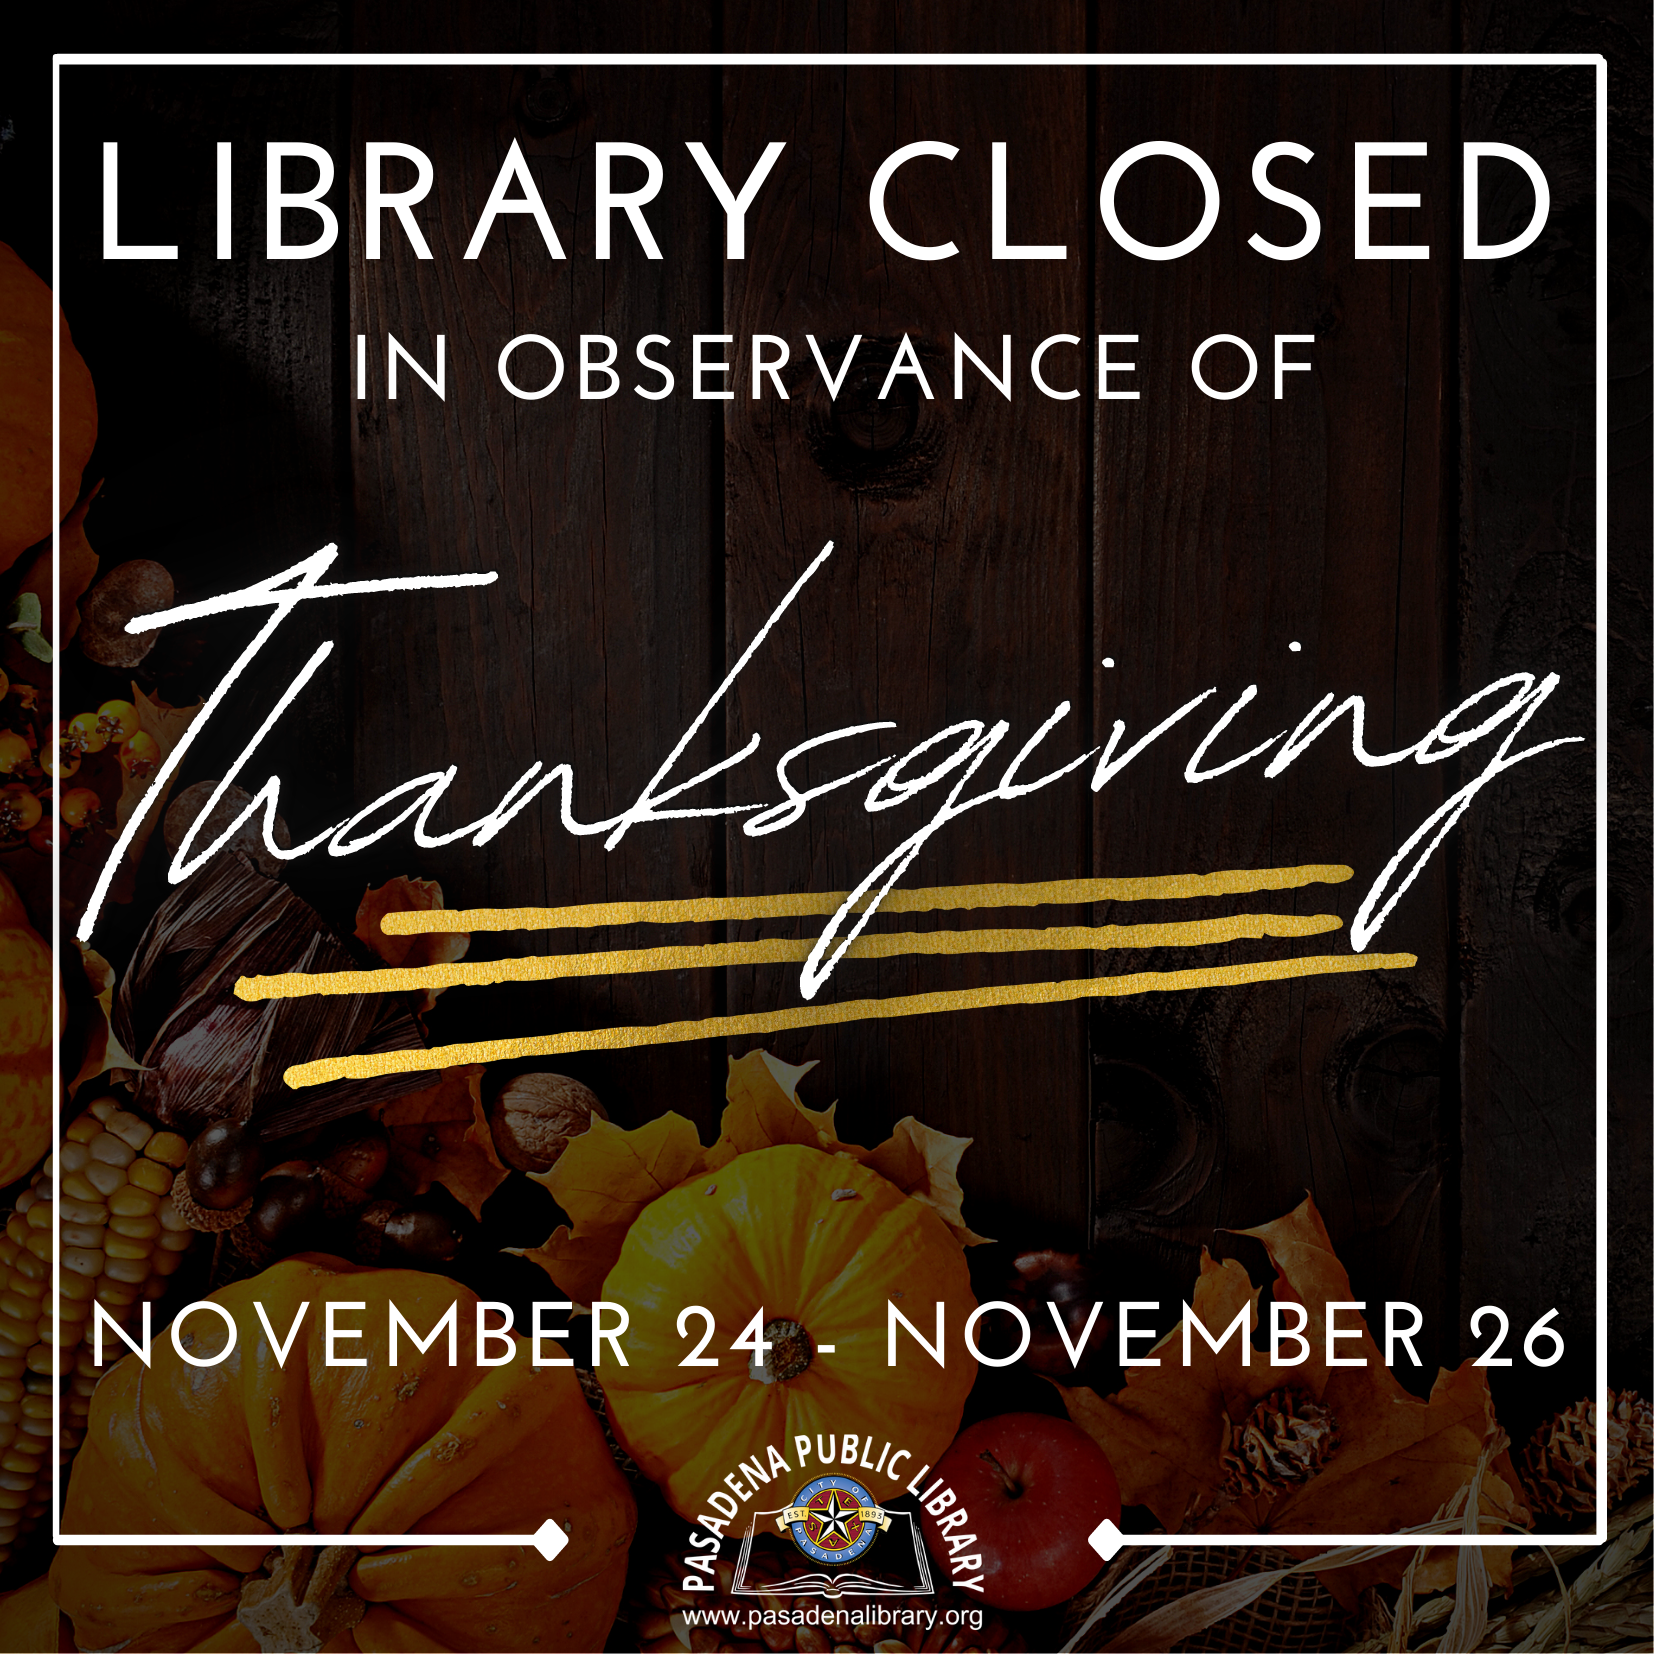 The Pasadena Public Library will be CLOSED Thursday, November 24 through Saturday, November 26 in observance of THANKSGIVING!  Library locations will re-open on Monday, November 28 at 10:00AM.